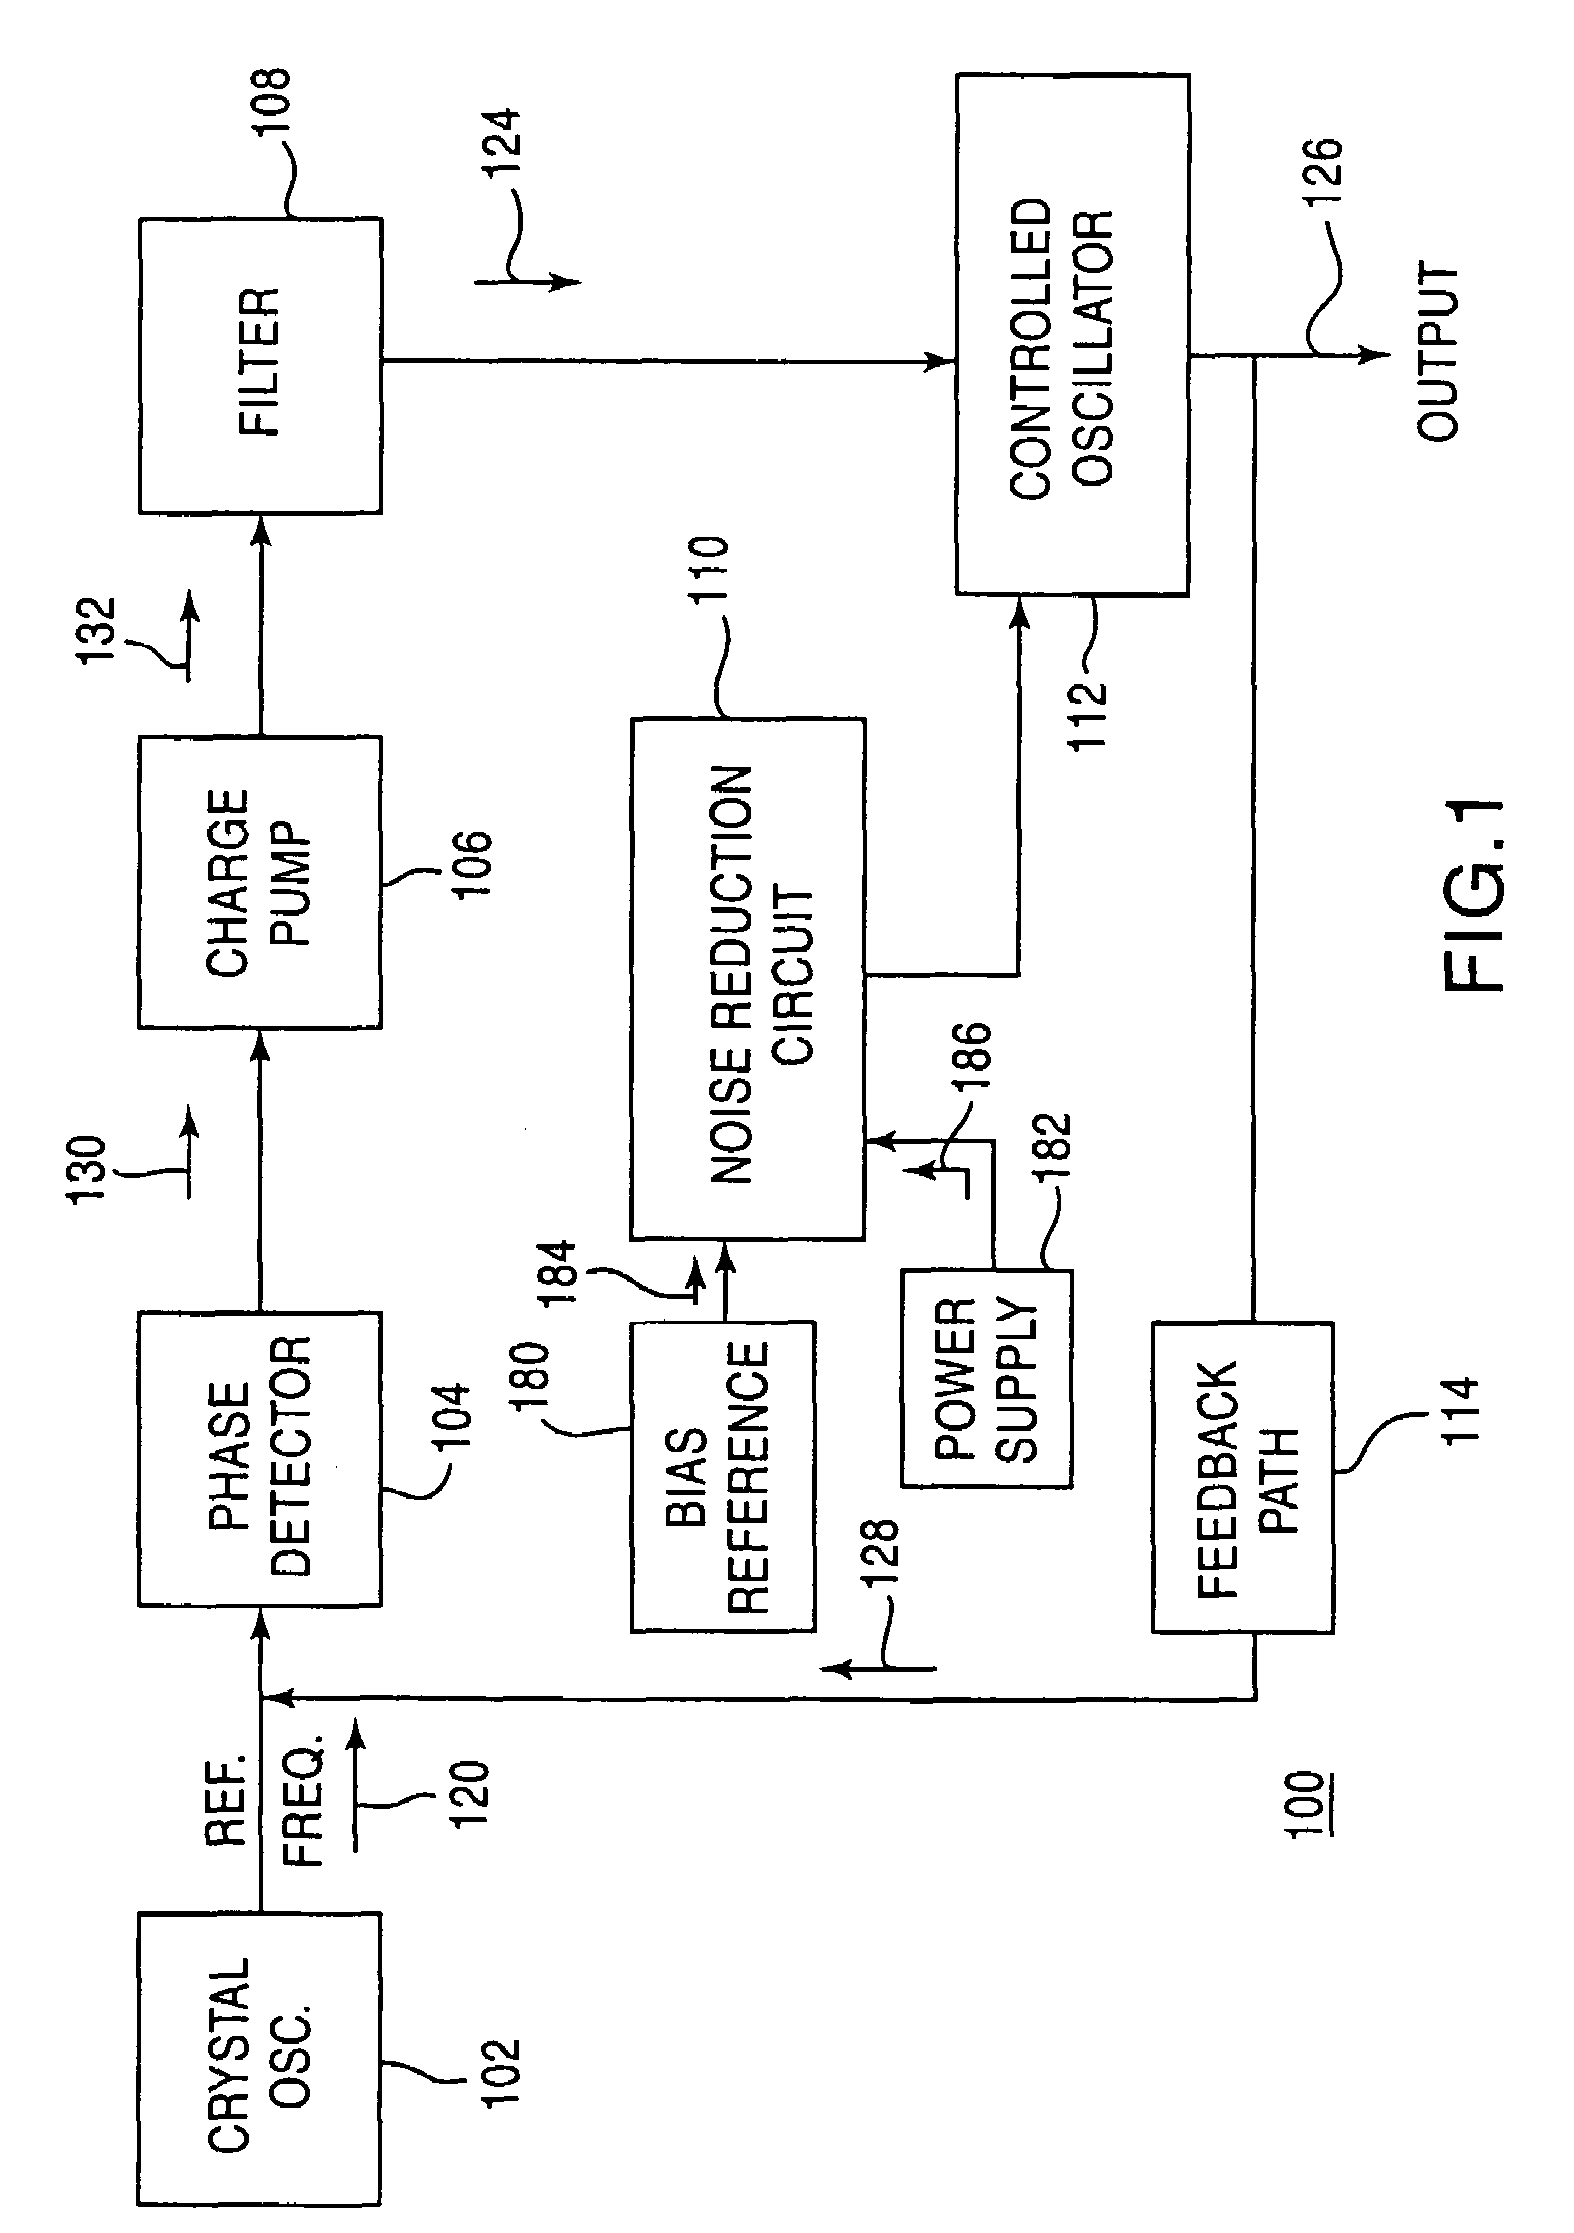 VCO with power supply rejection enhancement circuit